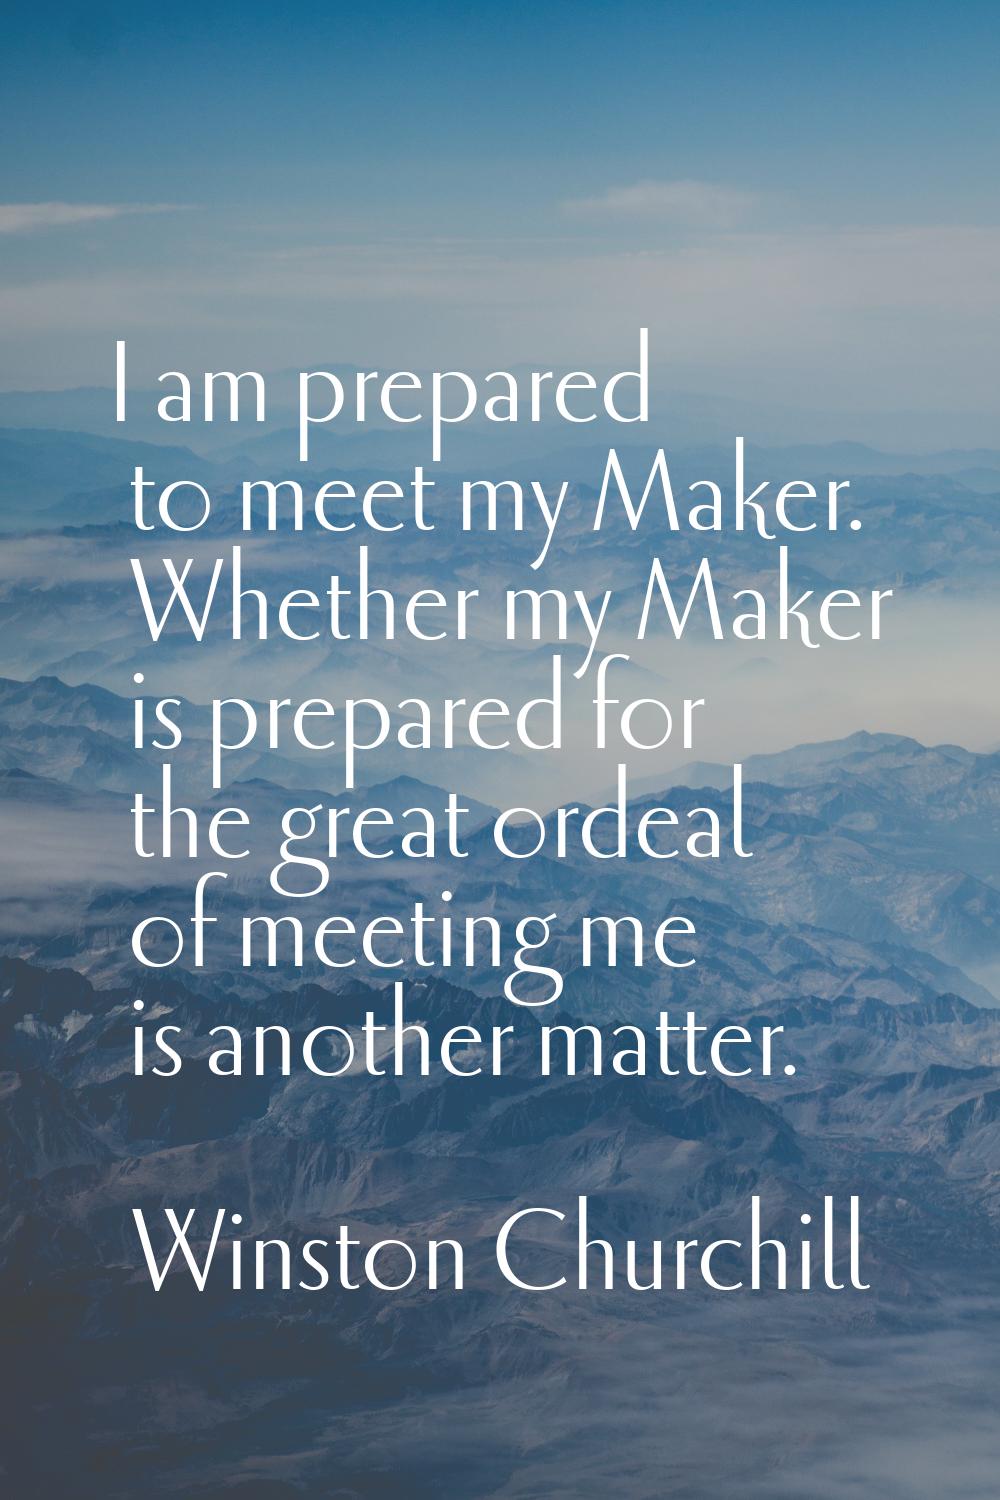 I am prepared to meet my Maker. Whether my Maker is prepared for the great ordeal of meeting me is 